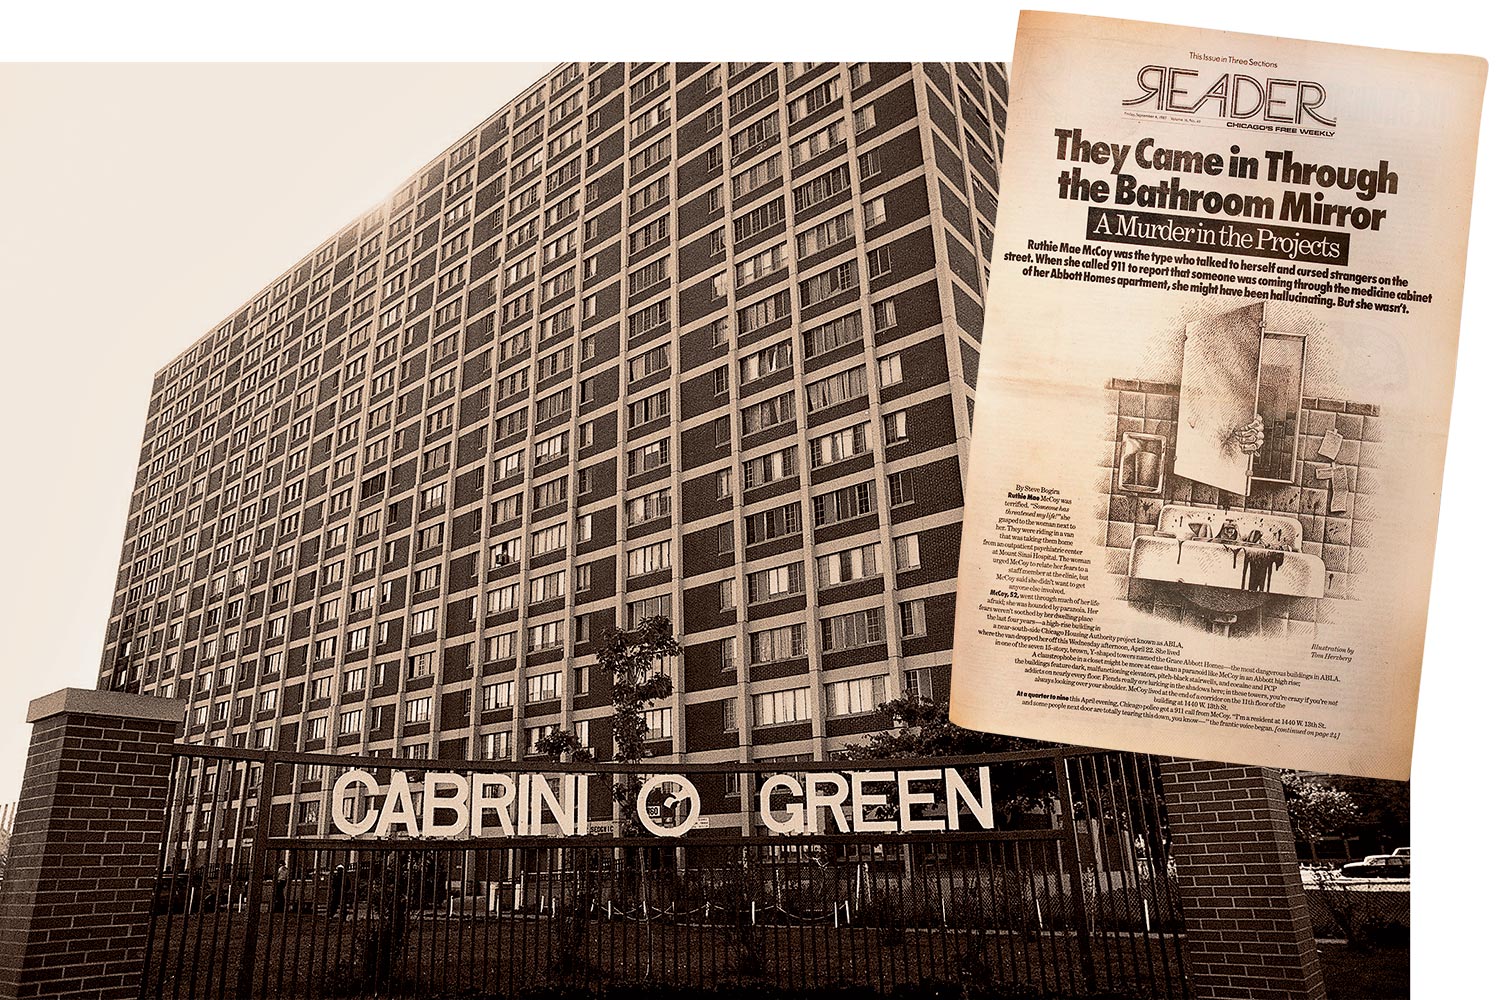 The last Cabrini-Green tower was demolished in 2011. Inset: The 1987 Reader story that got into Hollywood’s bloodstream.